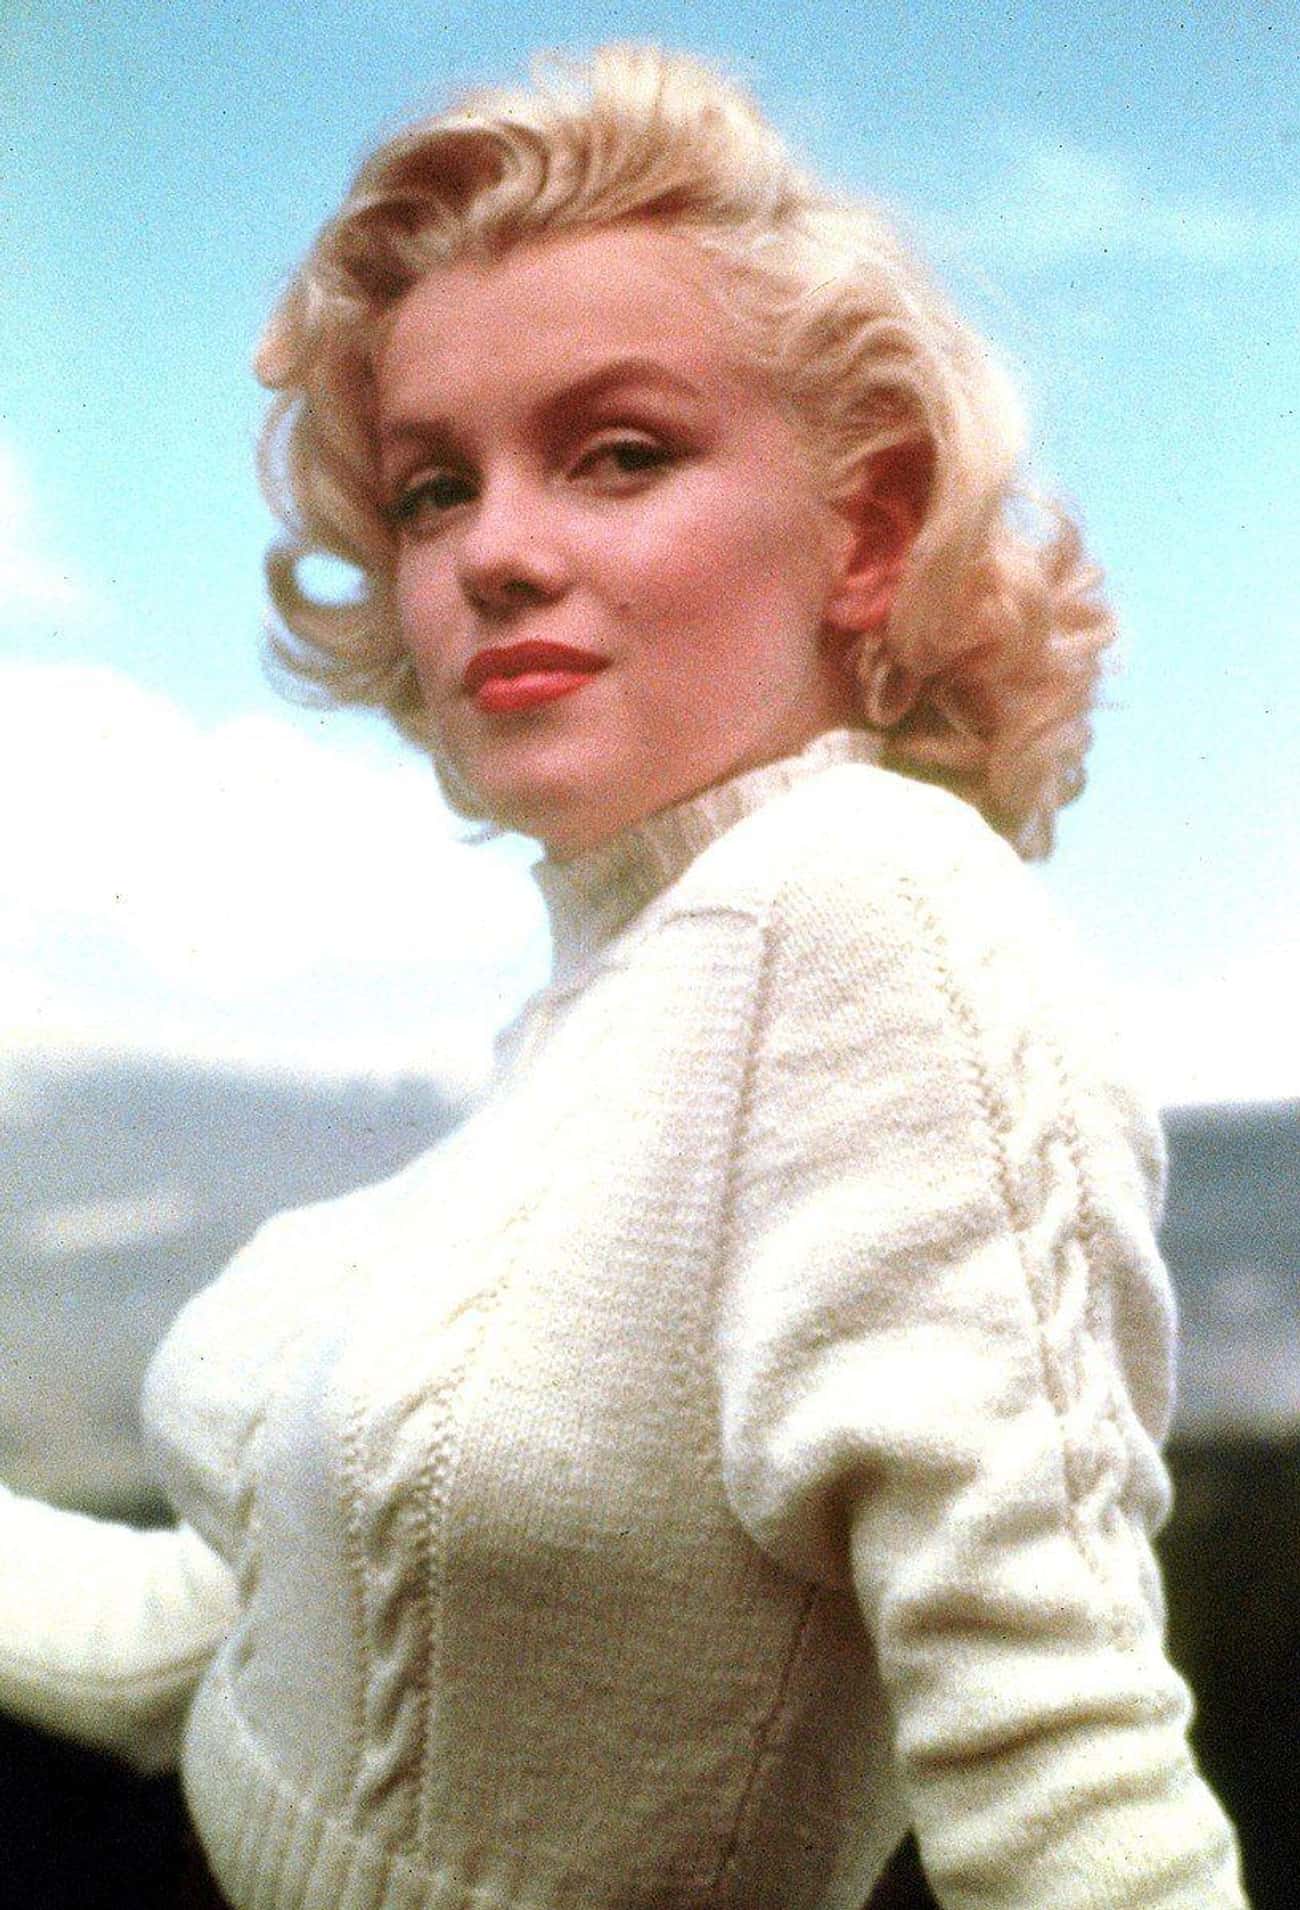 Marilyn Monroe Took Her Own Life At 36